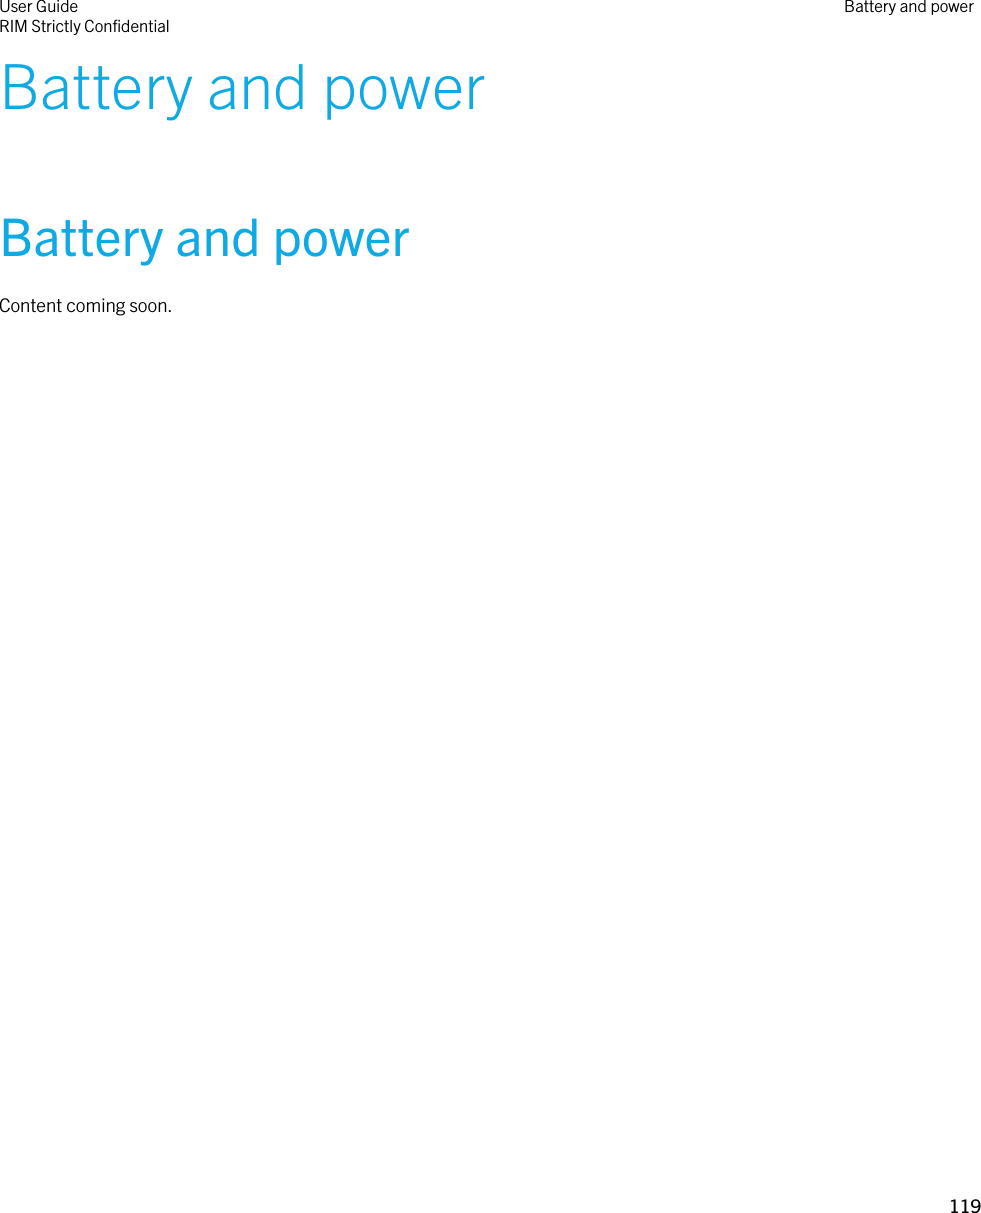 Battery and powerBattery and powerContent coming soon.User GuideRIM Strictly Confidential Battery and power119 